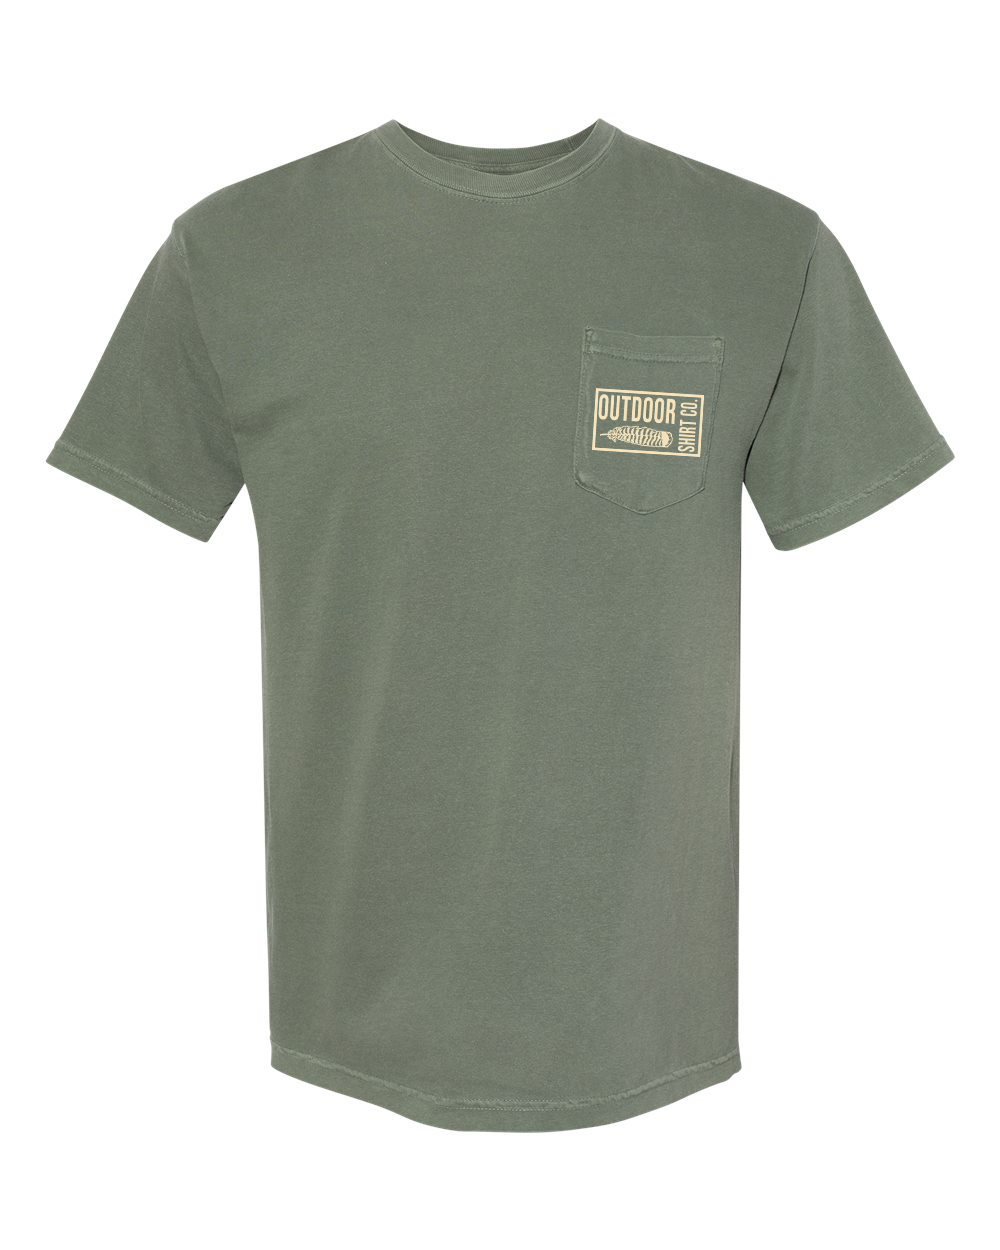 Gobble Tee - Two Color Options - Front/Back – Outdoor Shirt Co.